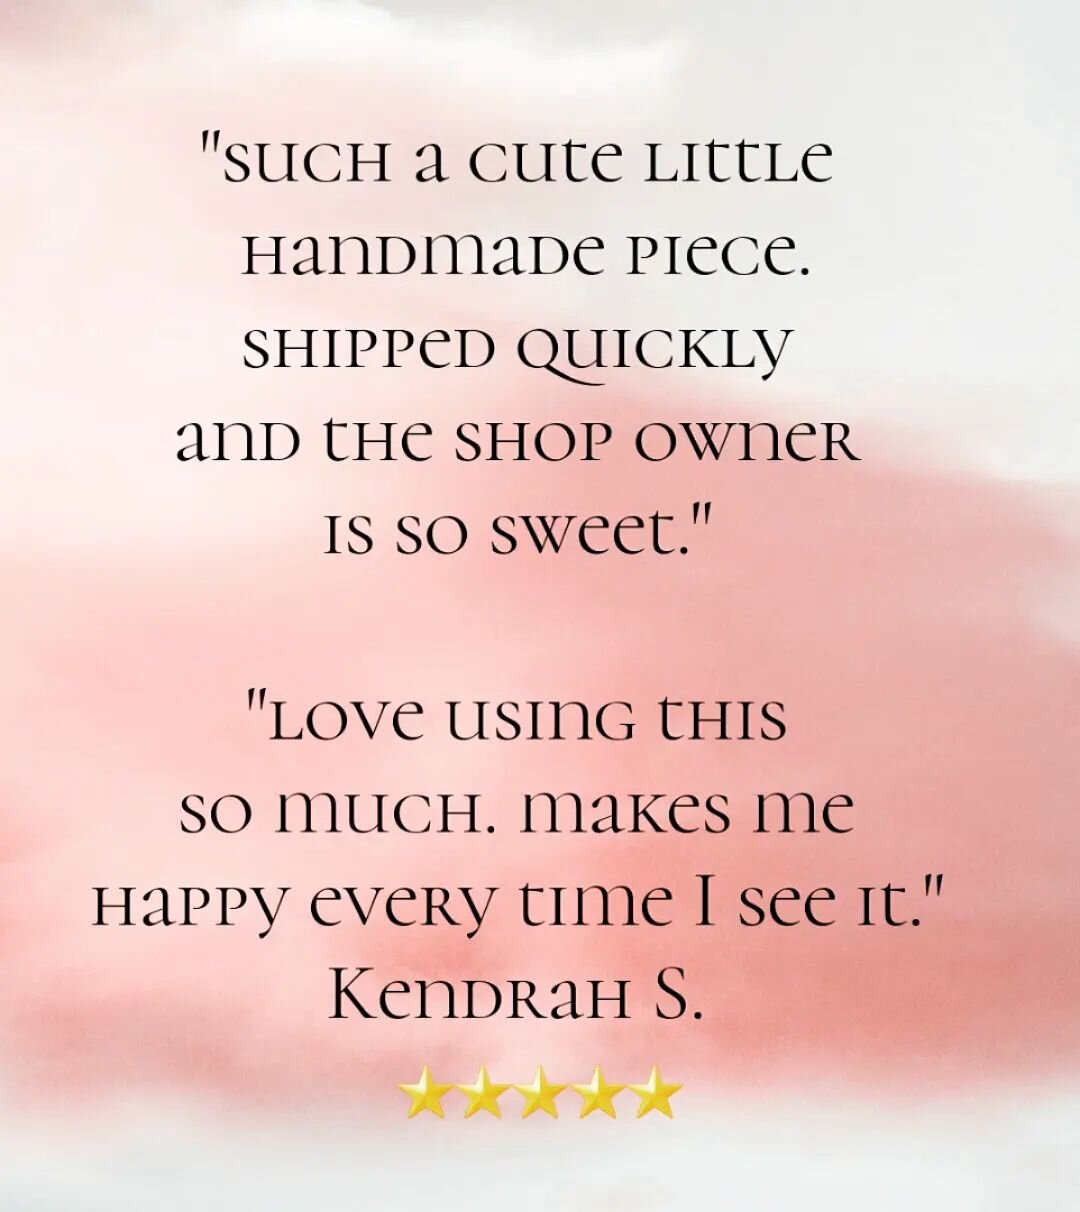 Another kind comment from a customer. Your sweet words mean more that I can express. 🥺💗
.
.
.
#about #aboutme #smallbusiness #smallbusinessowner #shopsmall #smallshoplove #smallbusinesssupport #smallbusiness #etsy #etsyseller #meettheowner #shopkee